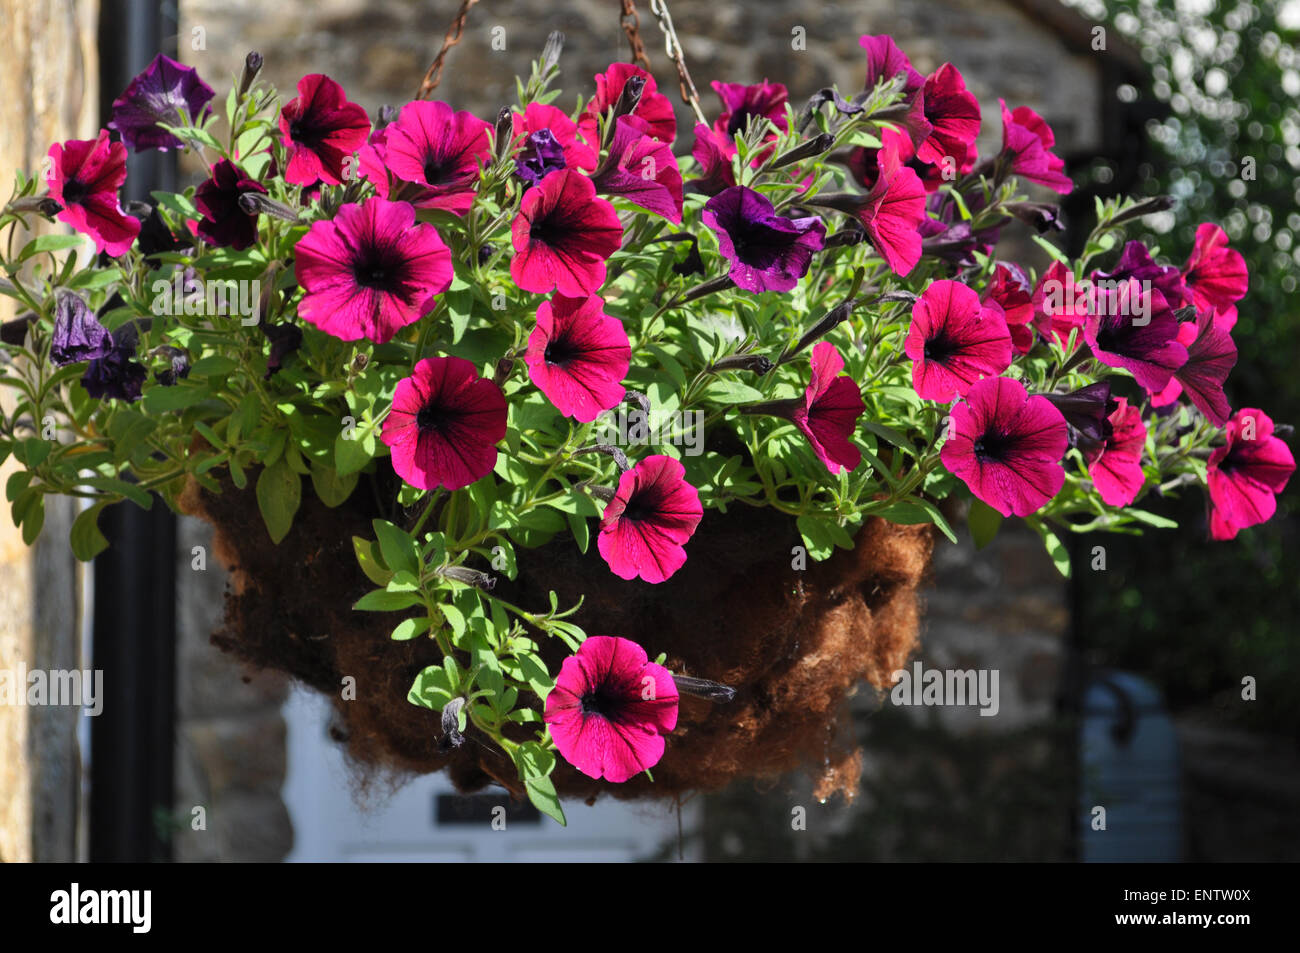 Trailing petunias in a hanging basket Stock Photo - Alamy